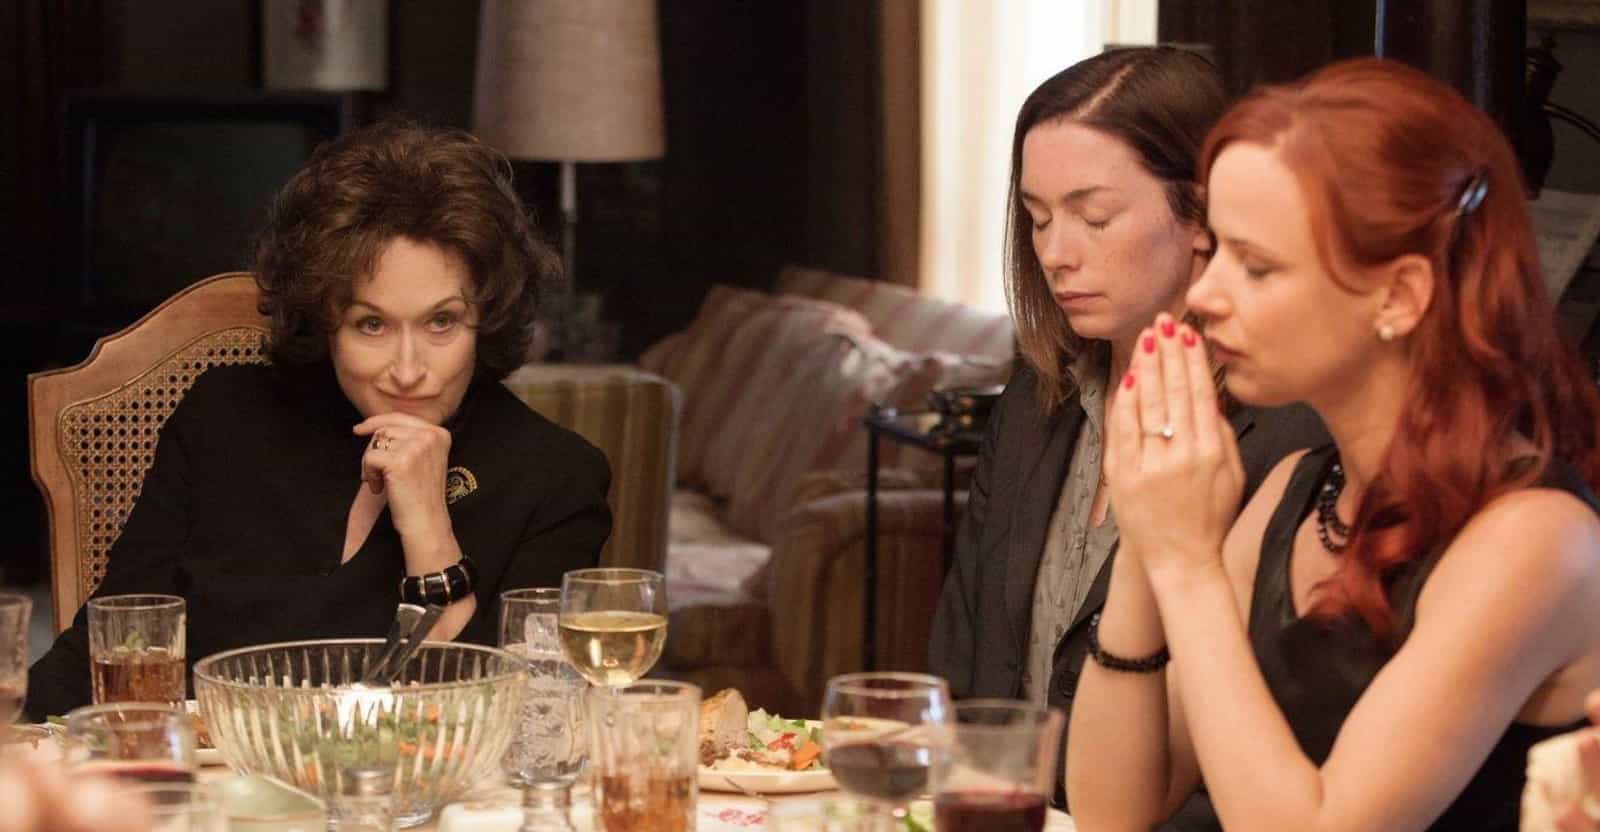 The Best Movies About Dysfunctional Families